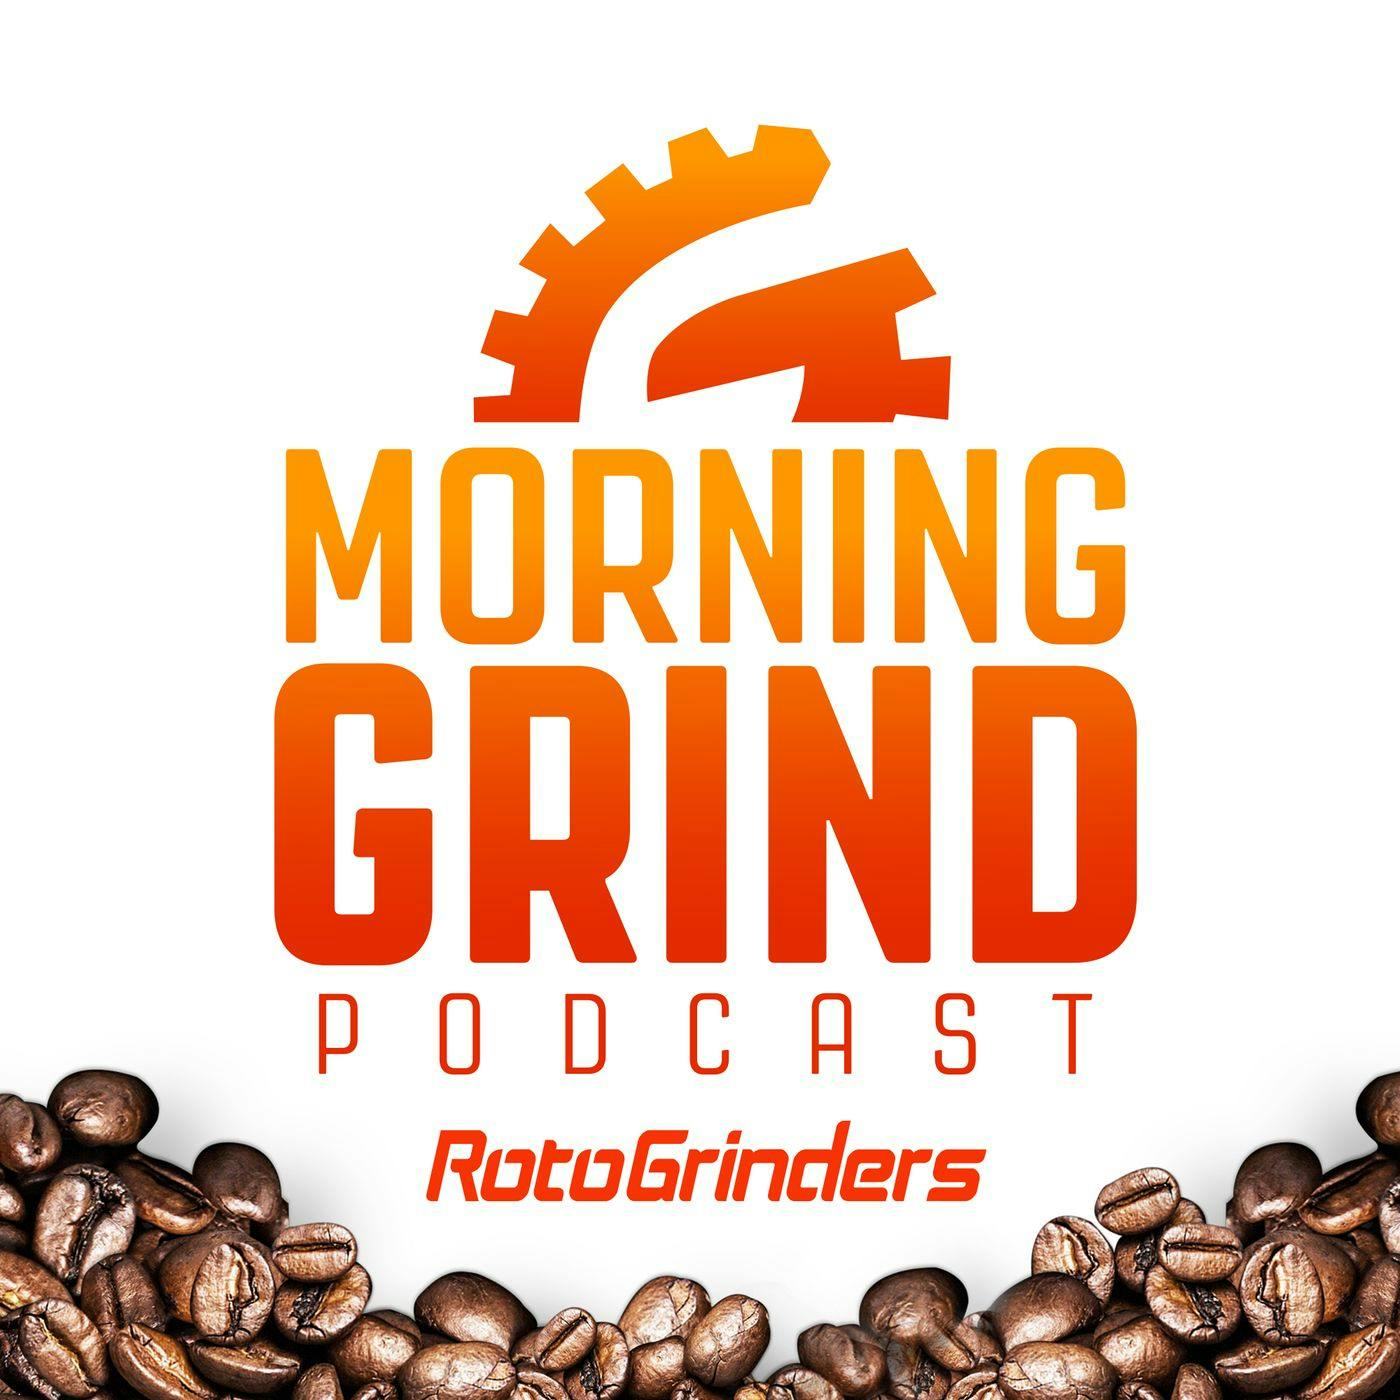 MLB Morning Grind: 6/6/2022 - We Don't Have To Be On The Same Side